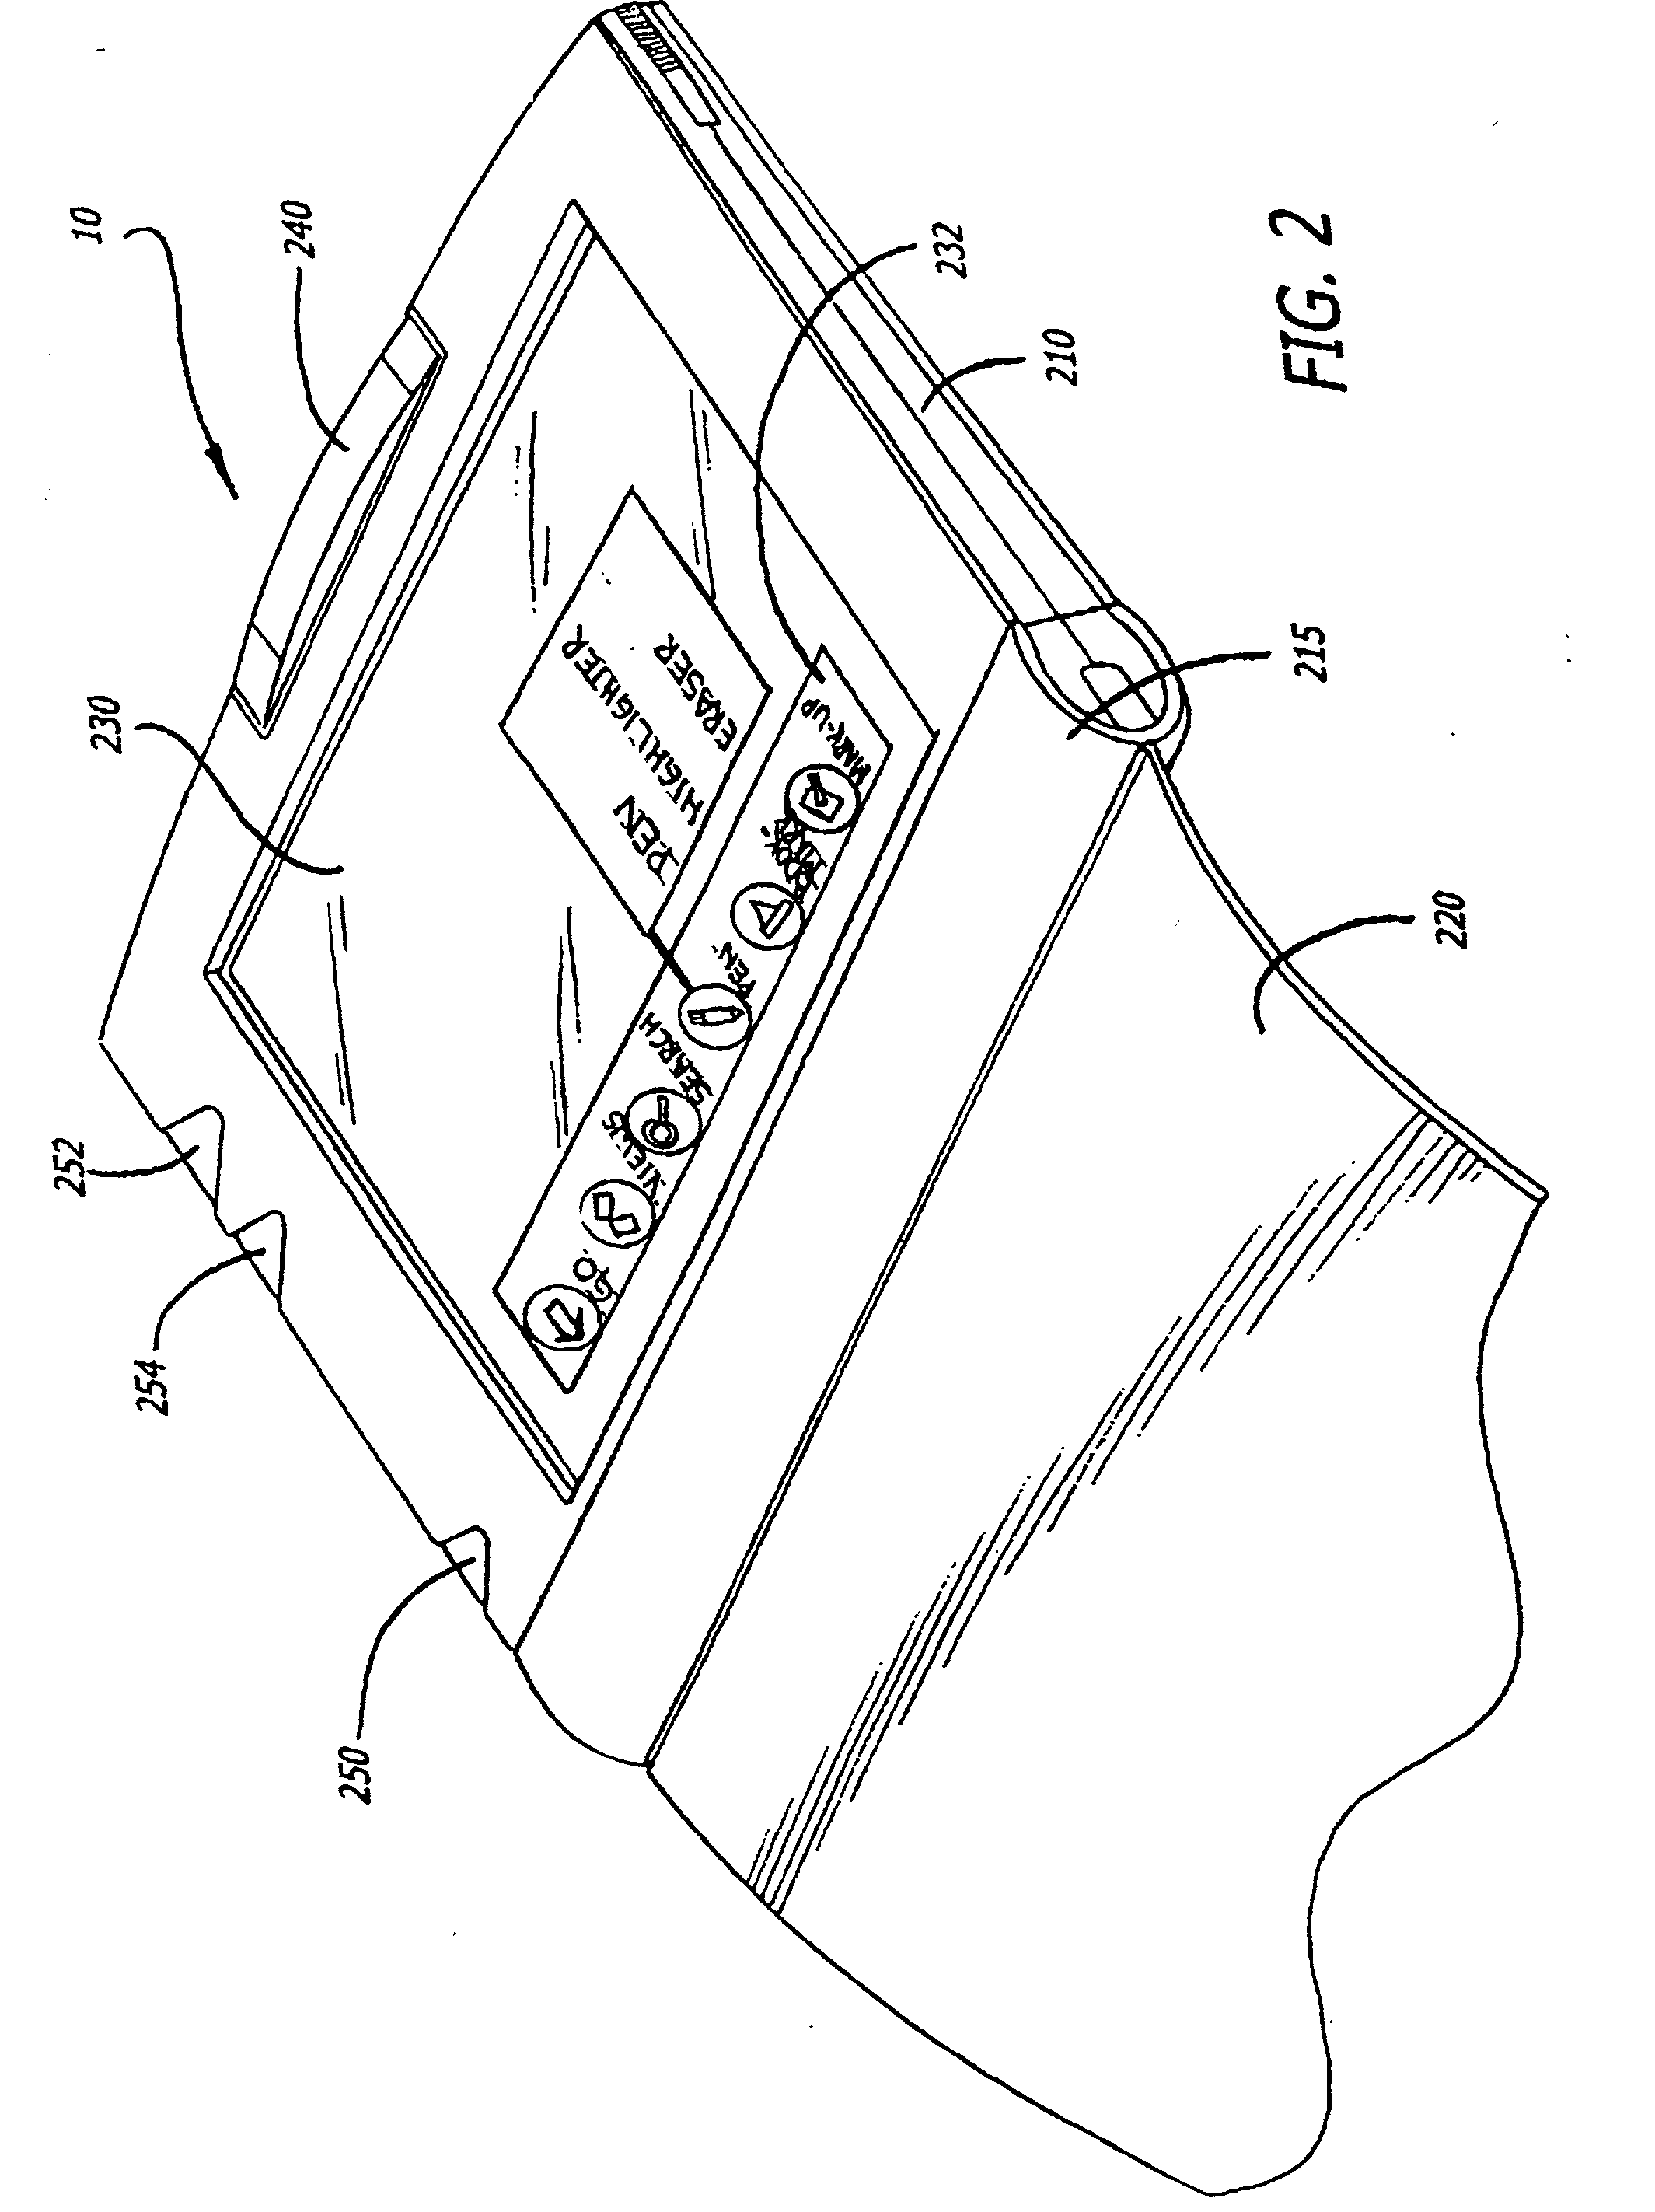 Systems and methods for electronic off-line catalog